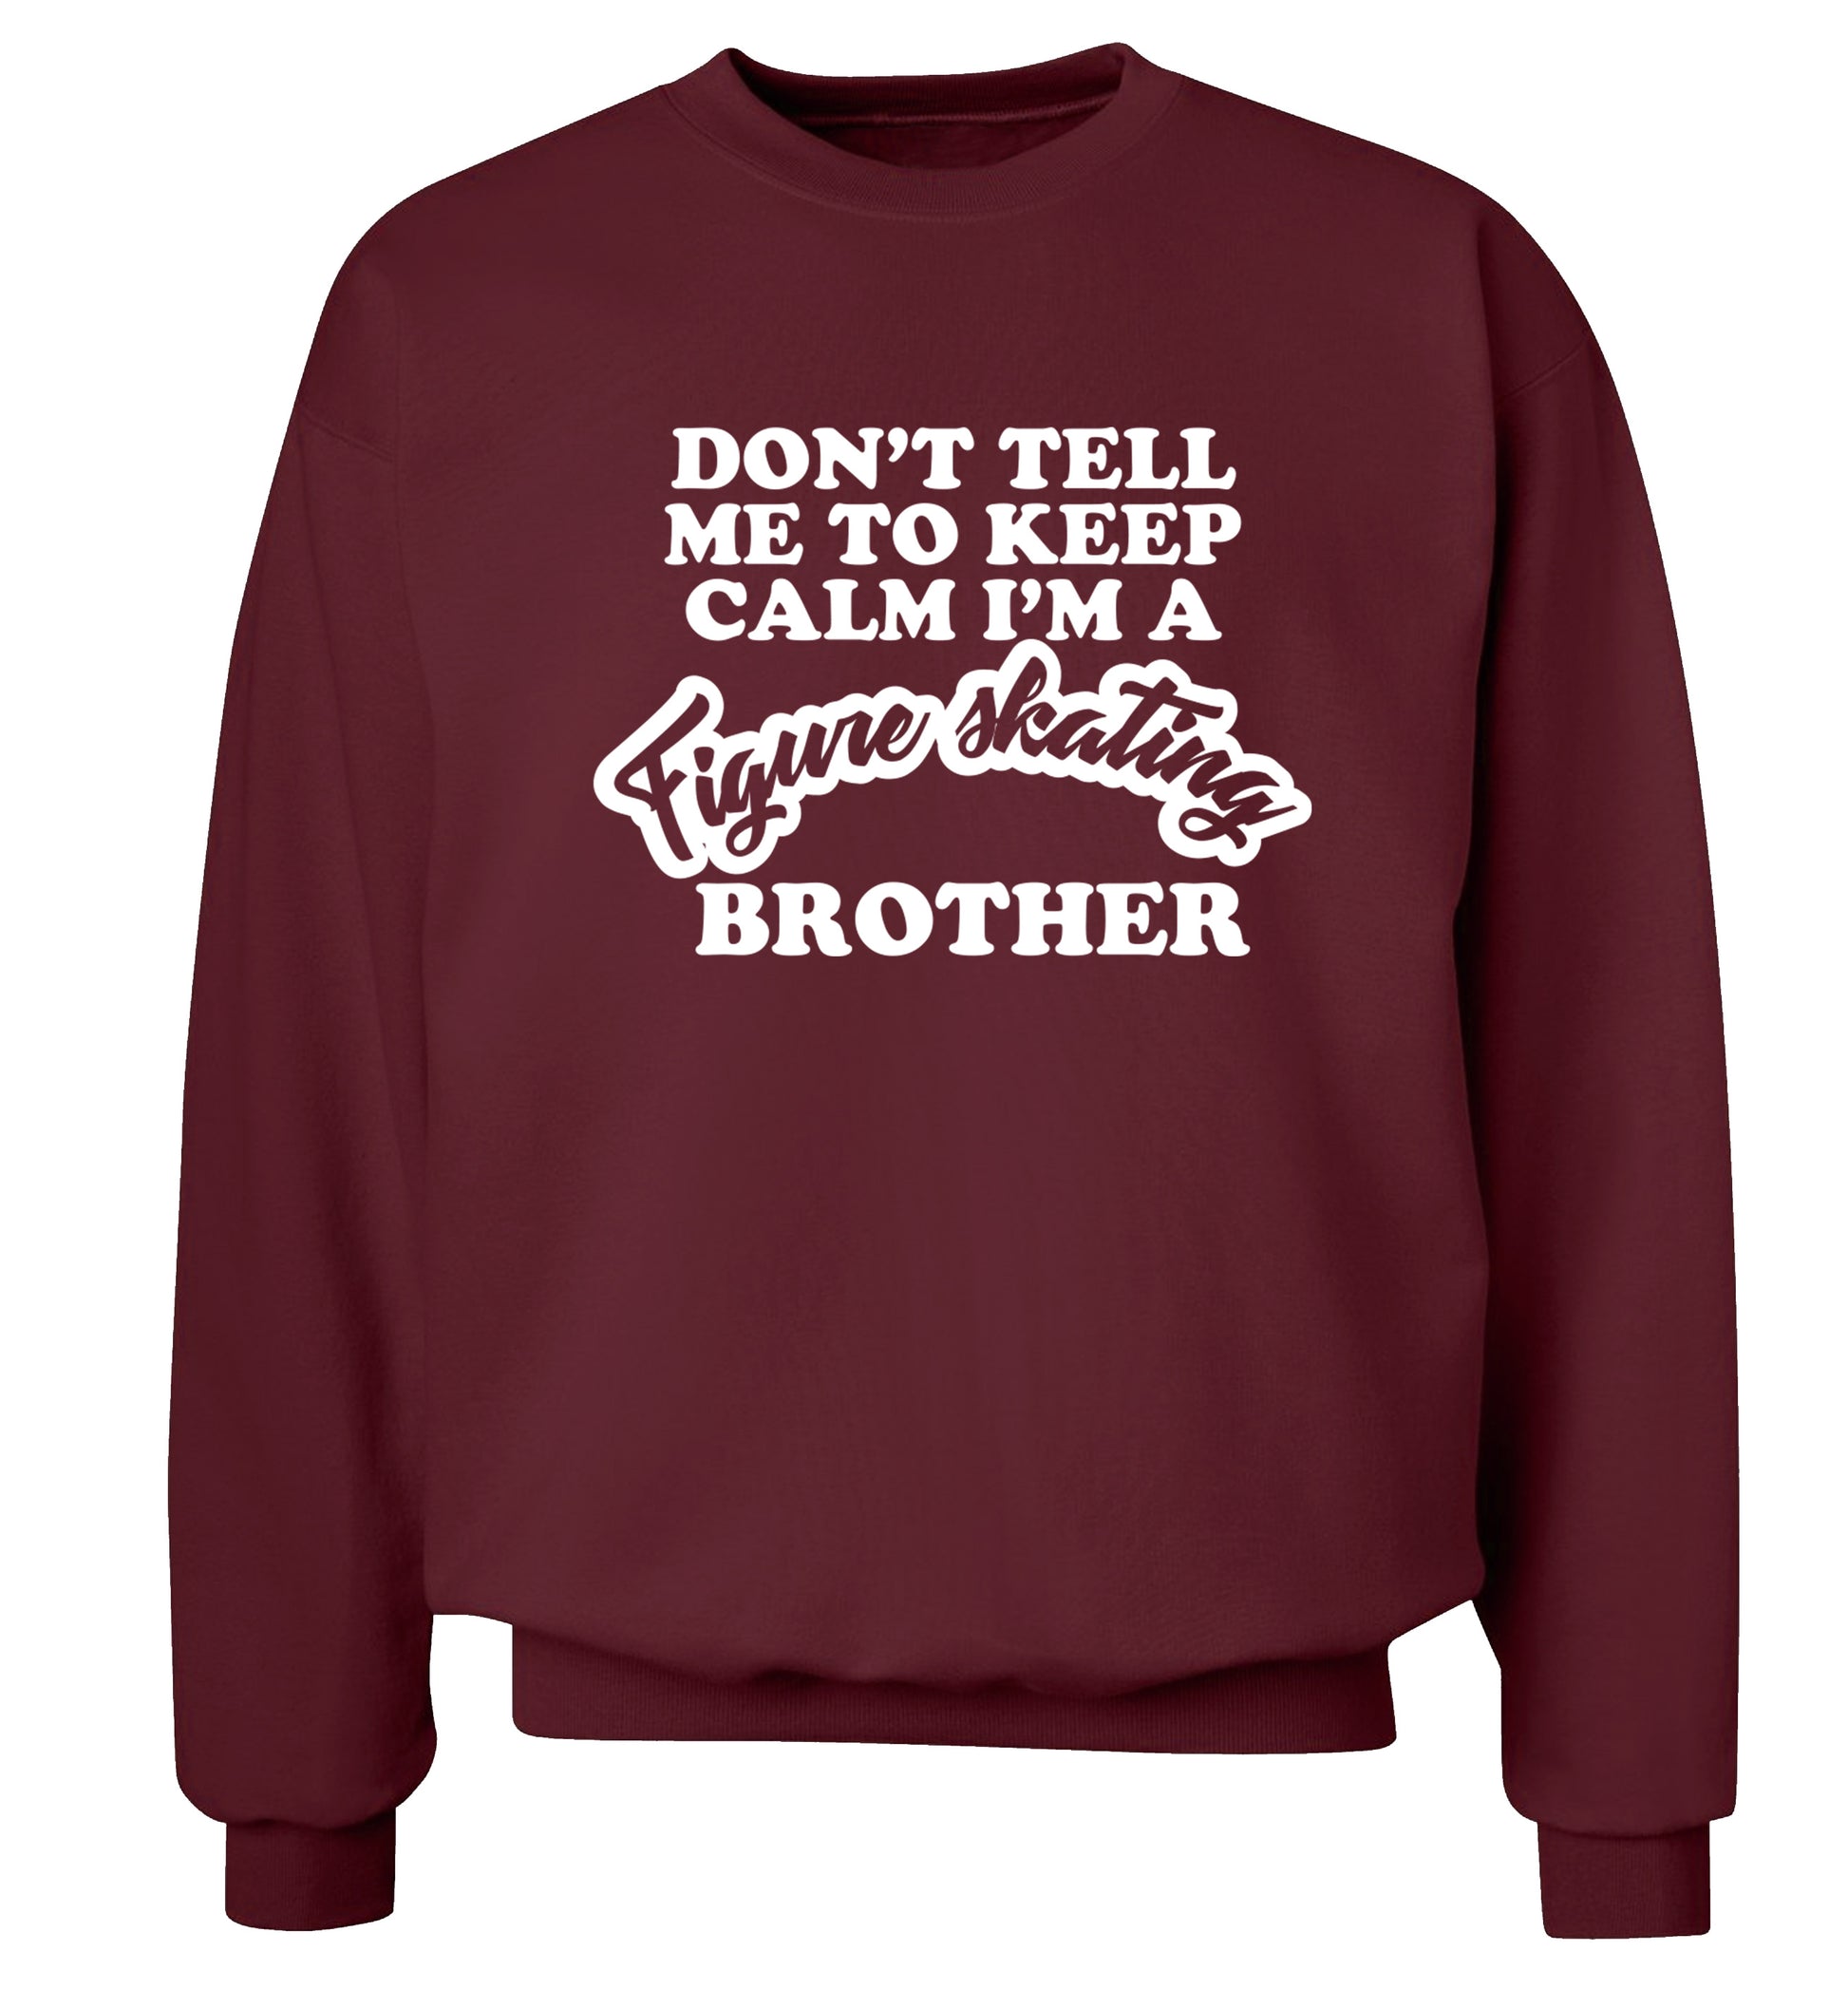 Don't tell me to keep calm I'm a figure skating brother Adult's unisexmaroon Sweater 2XL